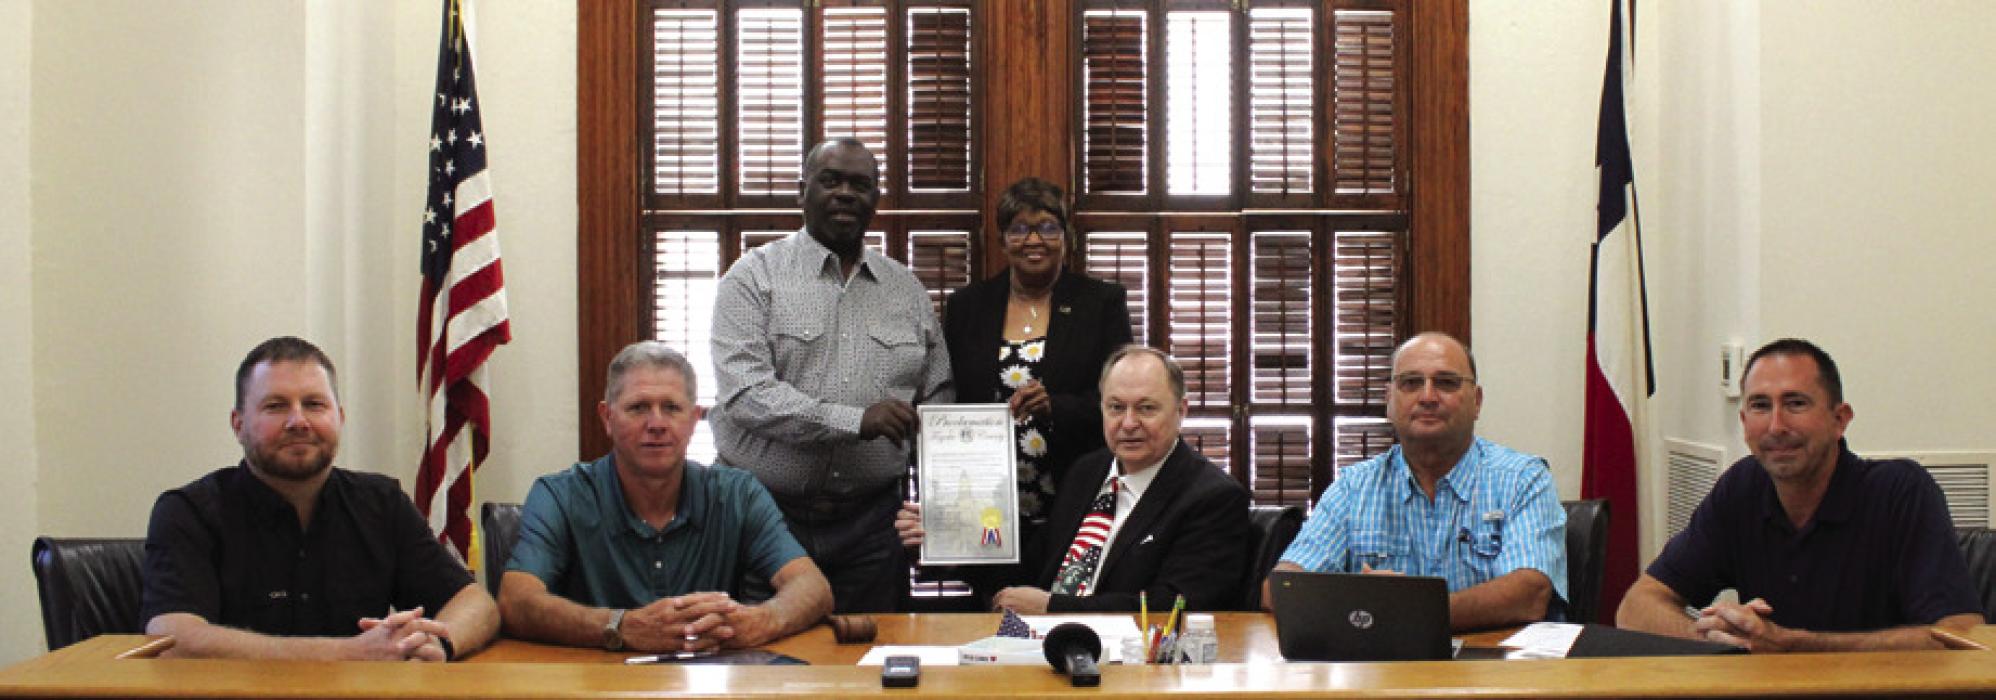 The Fayette County Commissioners Court signed a proclamation last Thursday designating June 19 as Emancipation Day in Fayette County. On hand for the signing were (back, from left), La Grange Juneteenth organizer Jonathan Ellis, La Grange Mayor Jan Dockery, (front) Pct. 4 Commissioner Drew Brossmann, Pct. 3 Commissioner Harvey Berckenhoff, County Judge Dan Mueller, Pct. 2 Commissioner Luke Sternadel and Pct. 1 Commissioner Jason McBroom. Photo by MaKenzie Givan